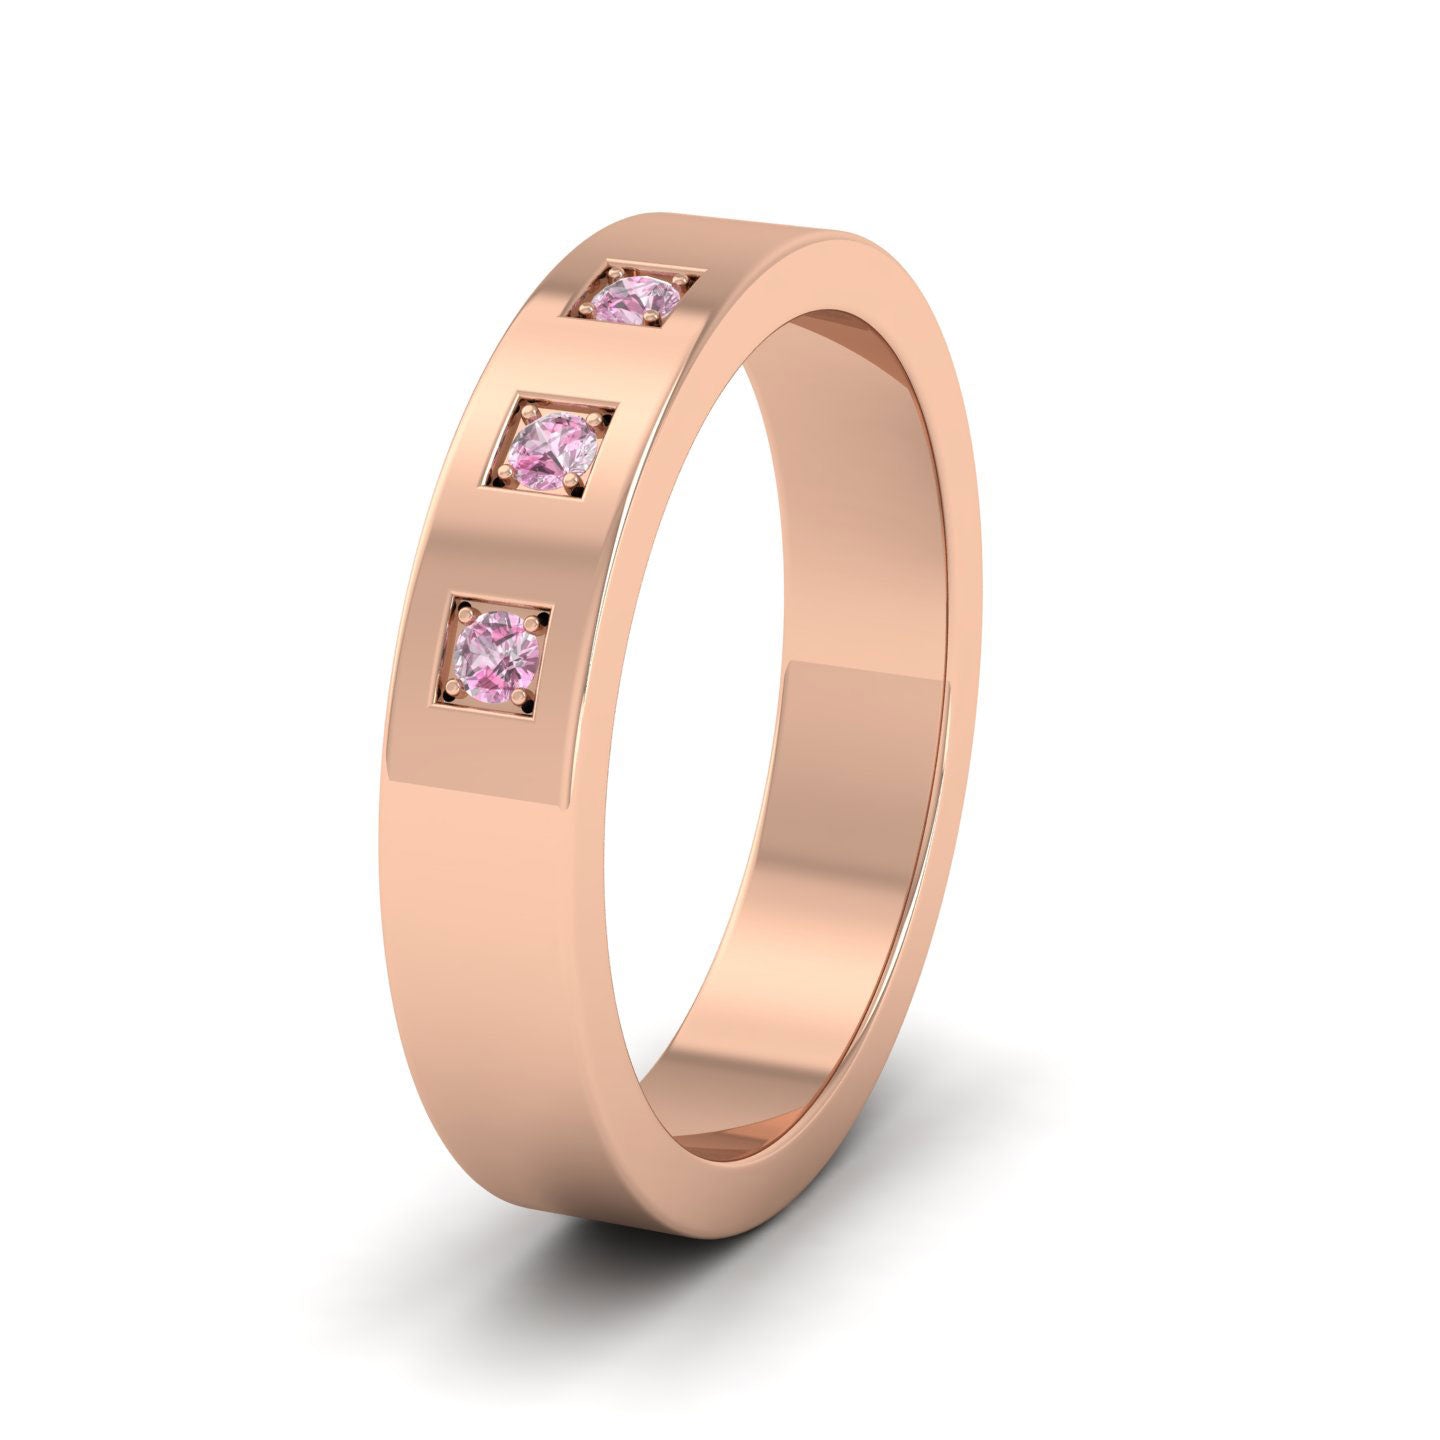 Three Pink Sapphires With Square Setting 18ct Rose Gold 4mm Wedding Ring